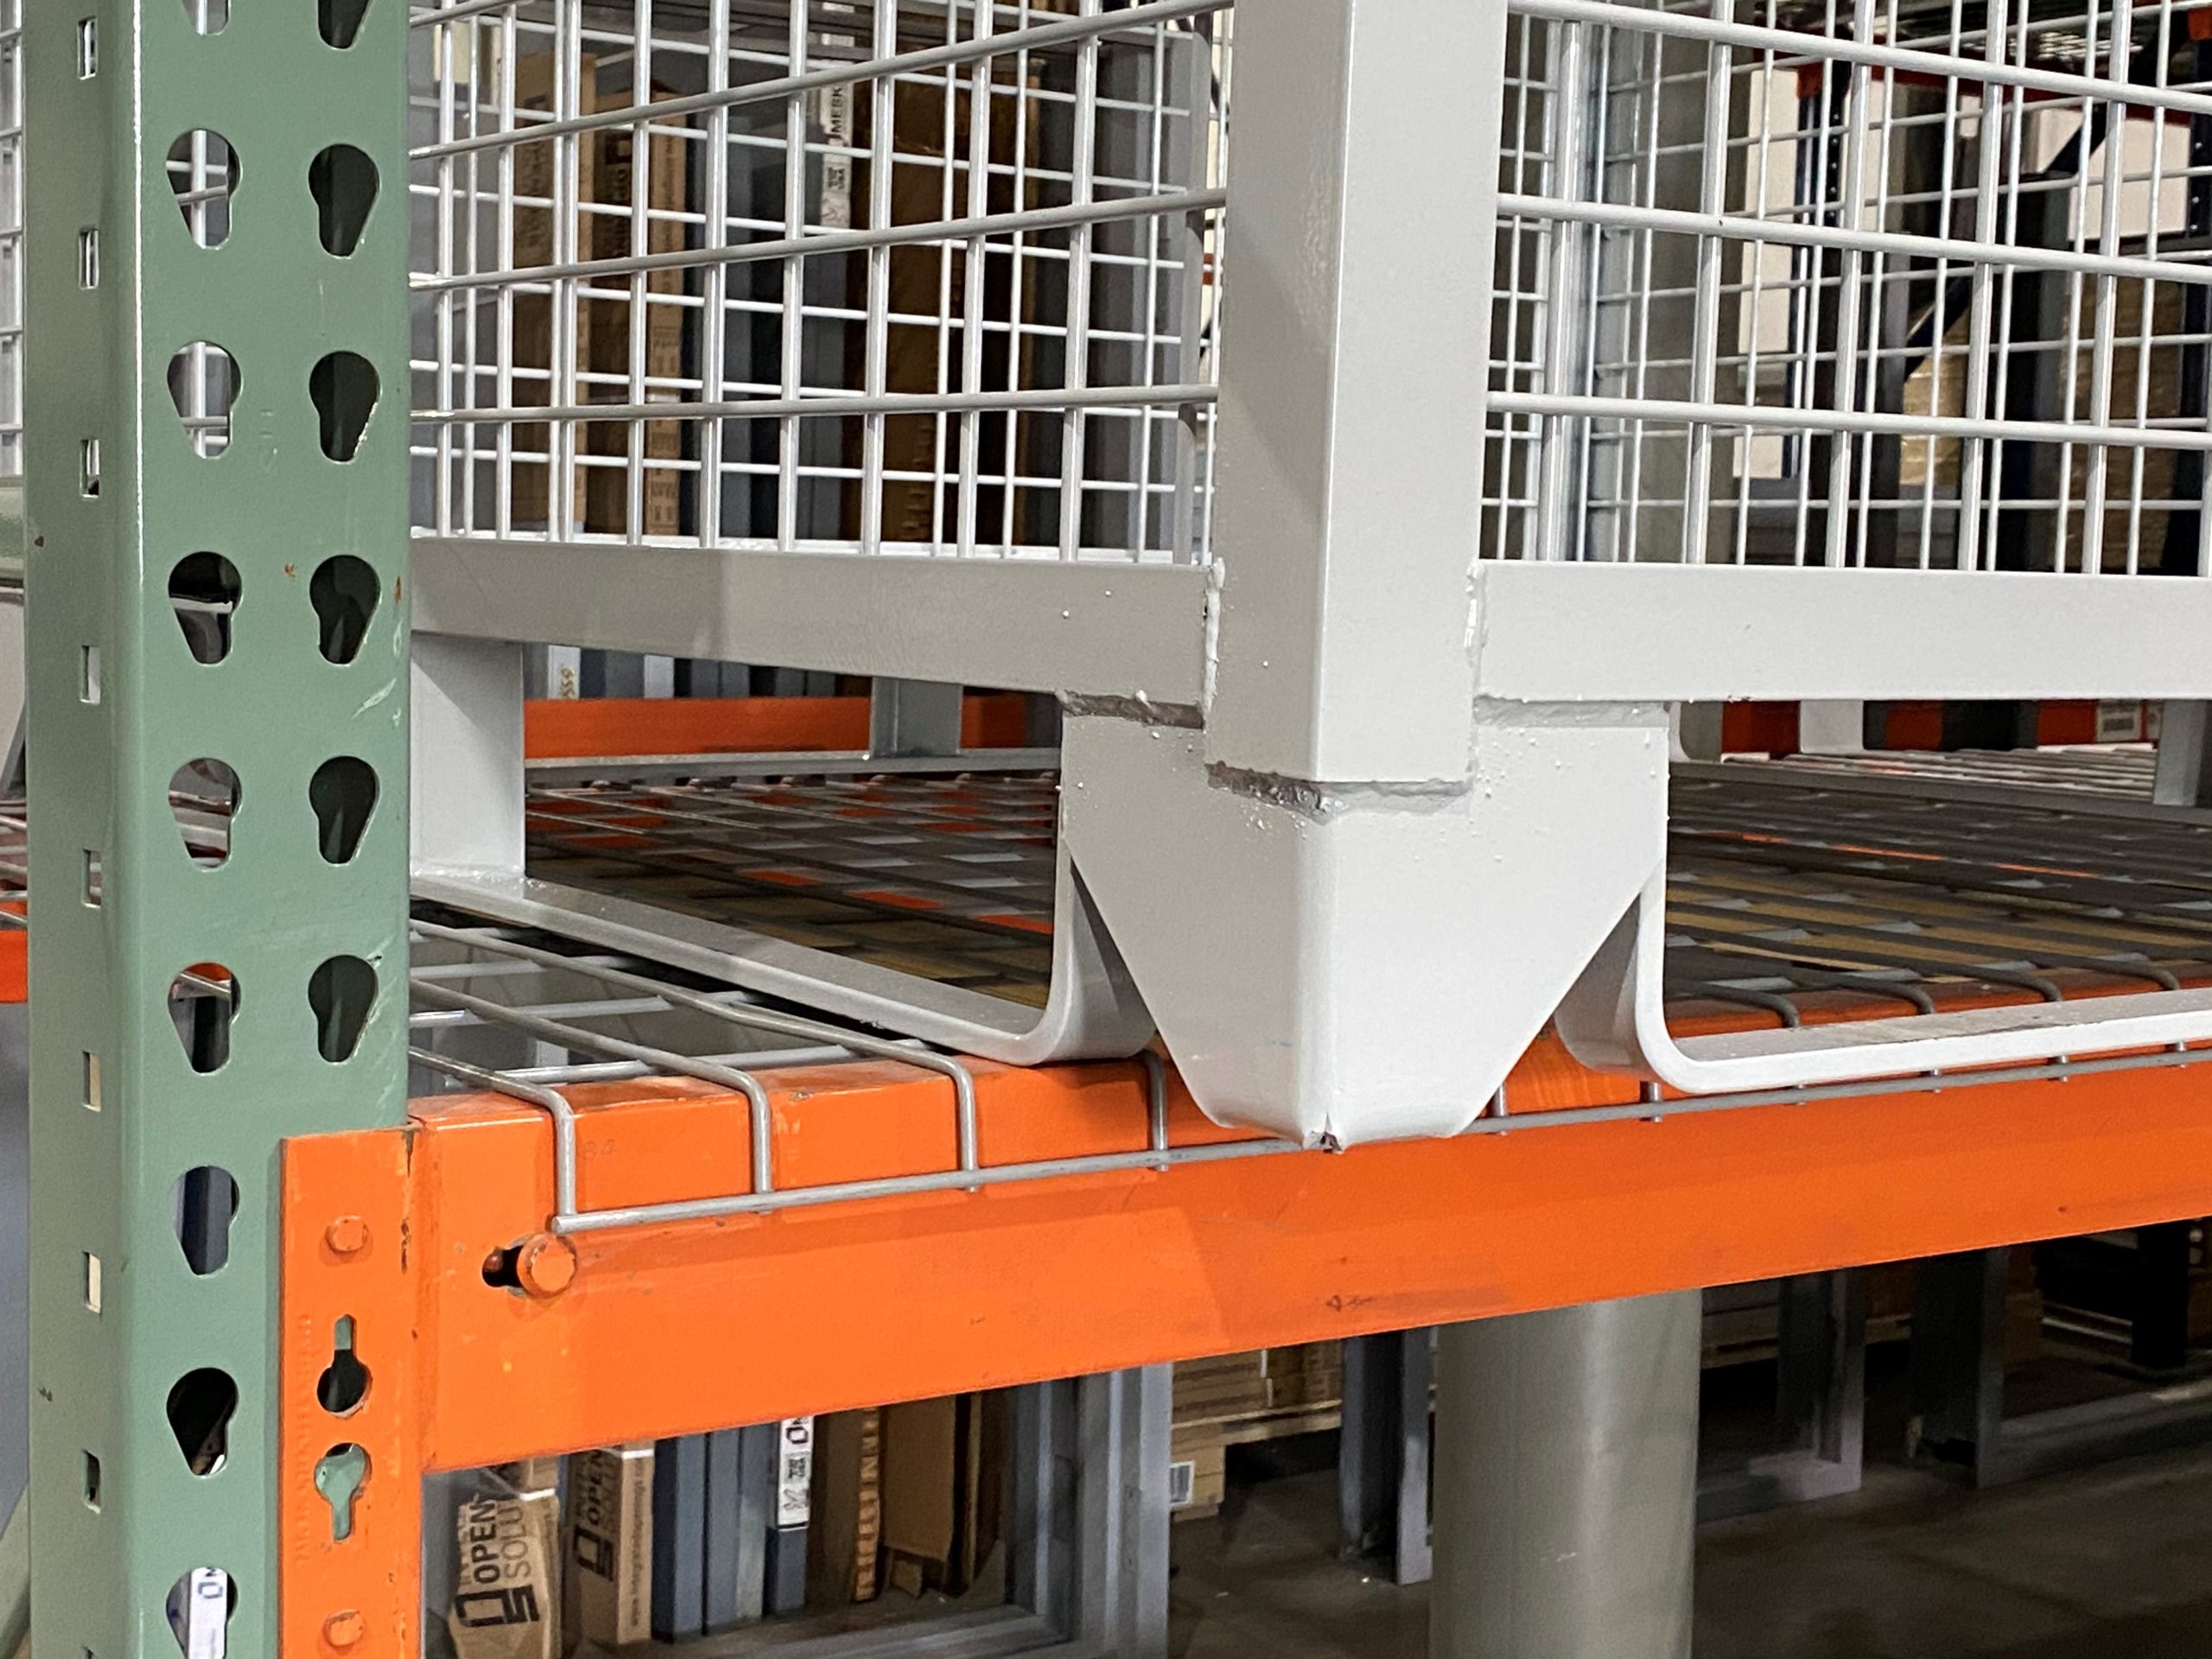 https://rackandshelf.com/wp-content/uploads/Rackable-Rigid-Wire-Container-with-Steel-Angle-Runners-scaled.jpg